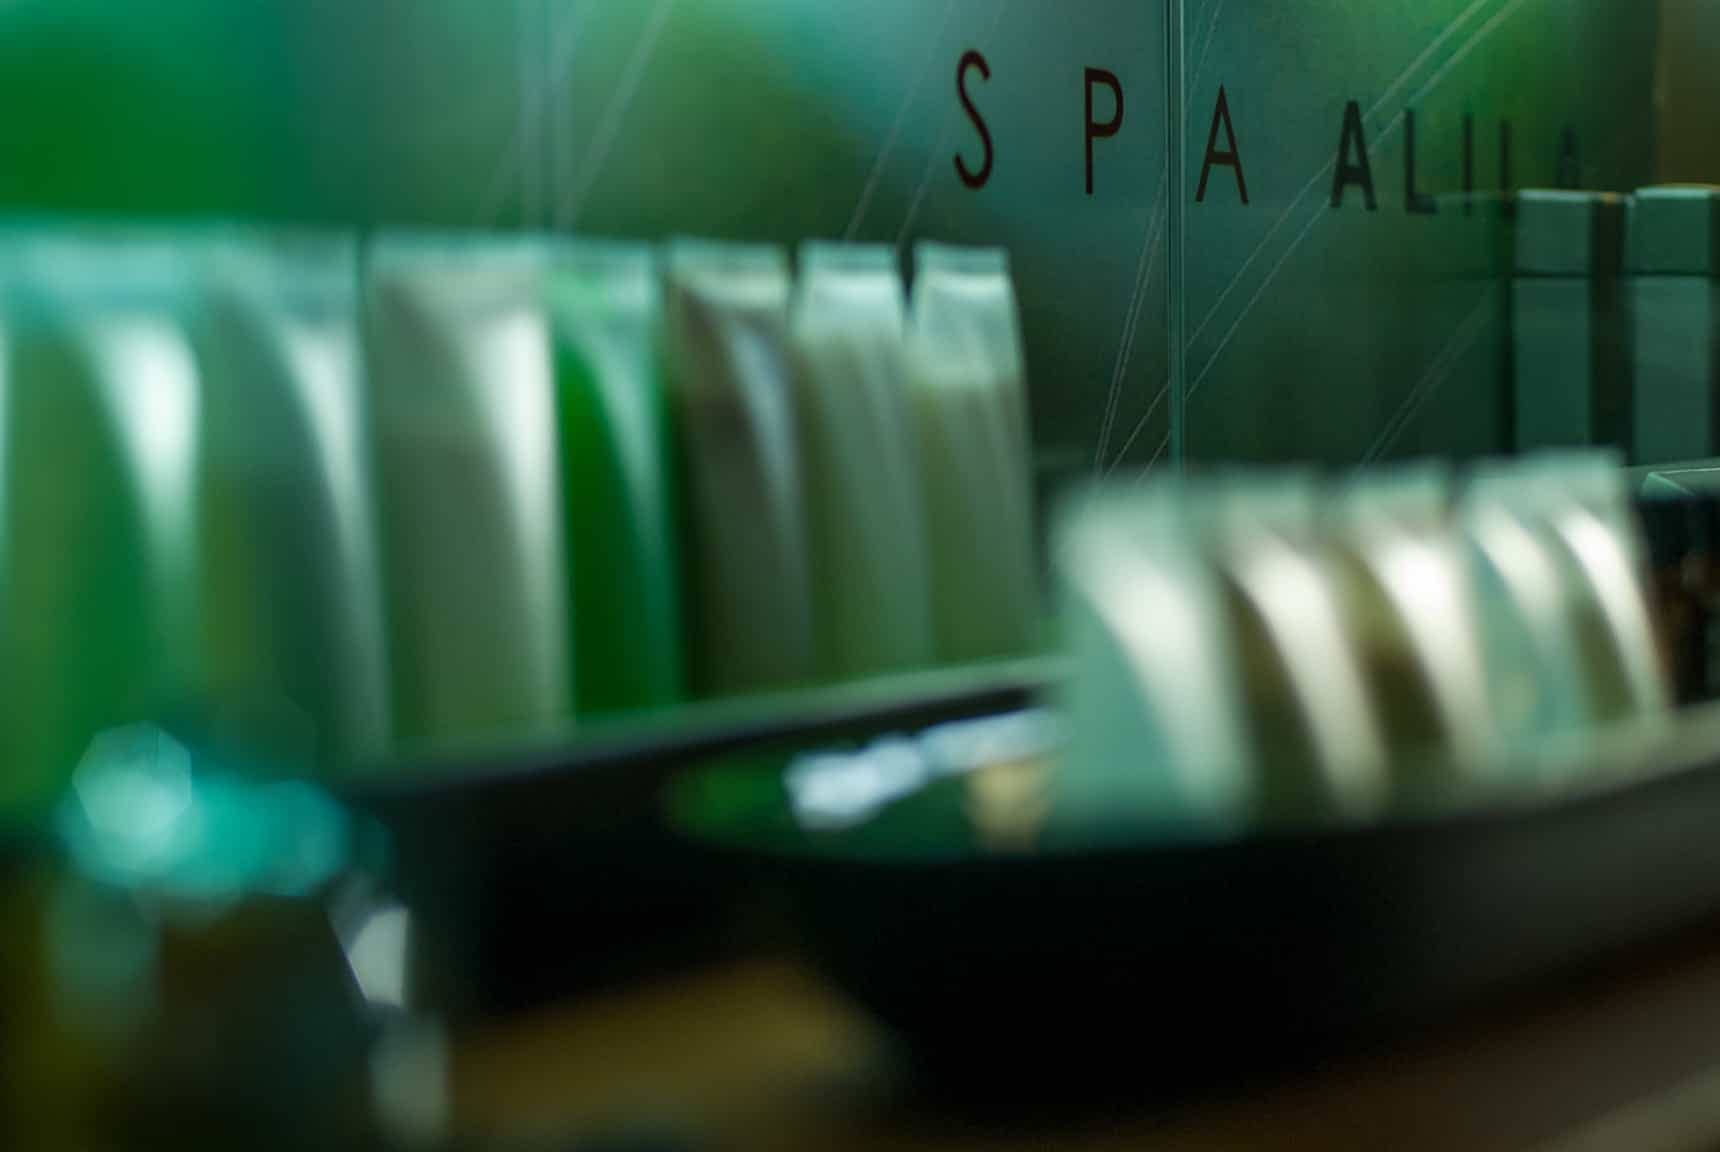 Professional photos of spa products and treatments